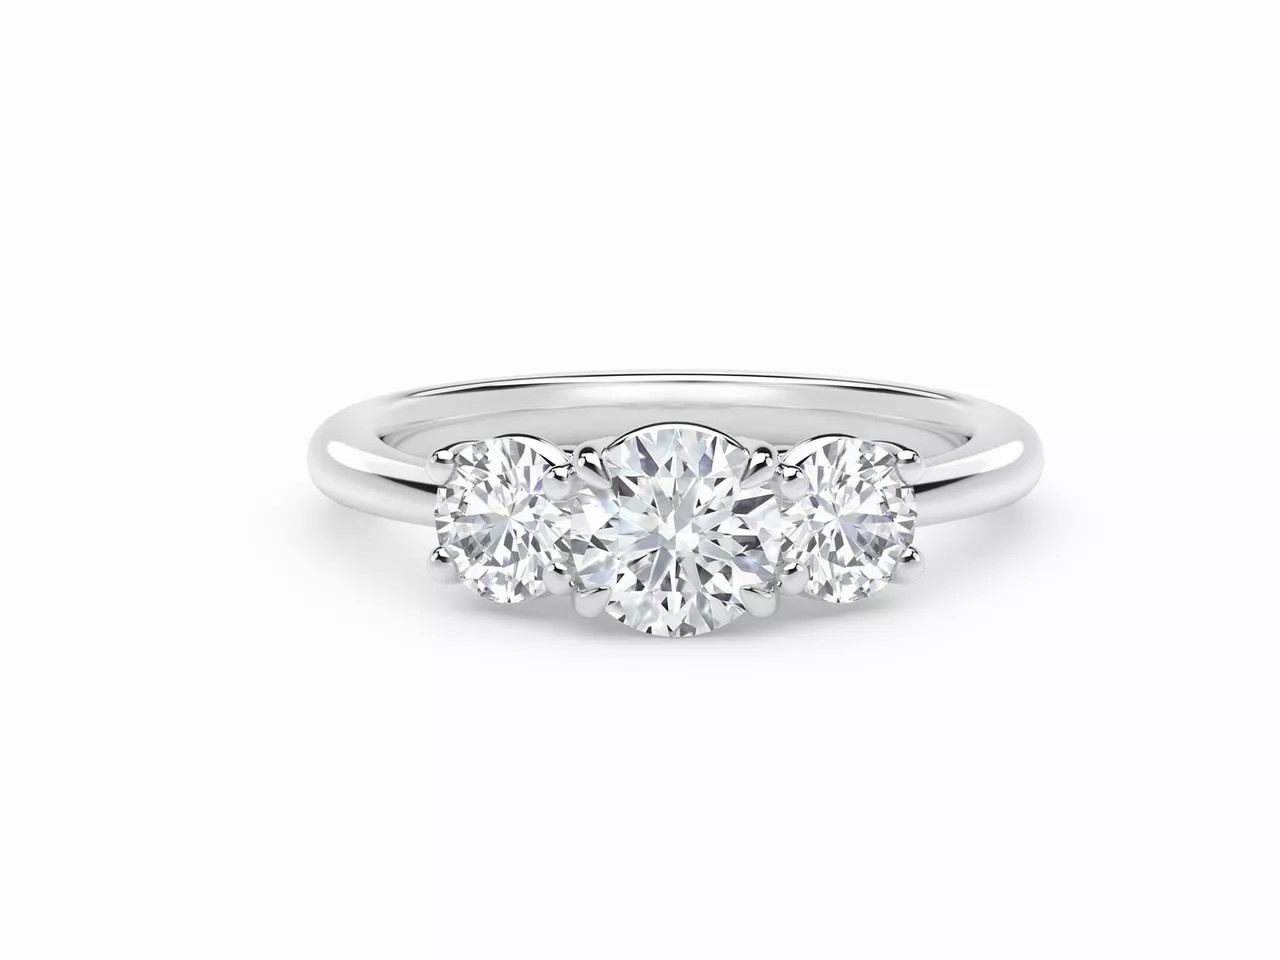 7 Engagement Ring Trends You'll See In 2021